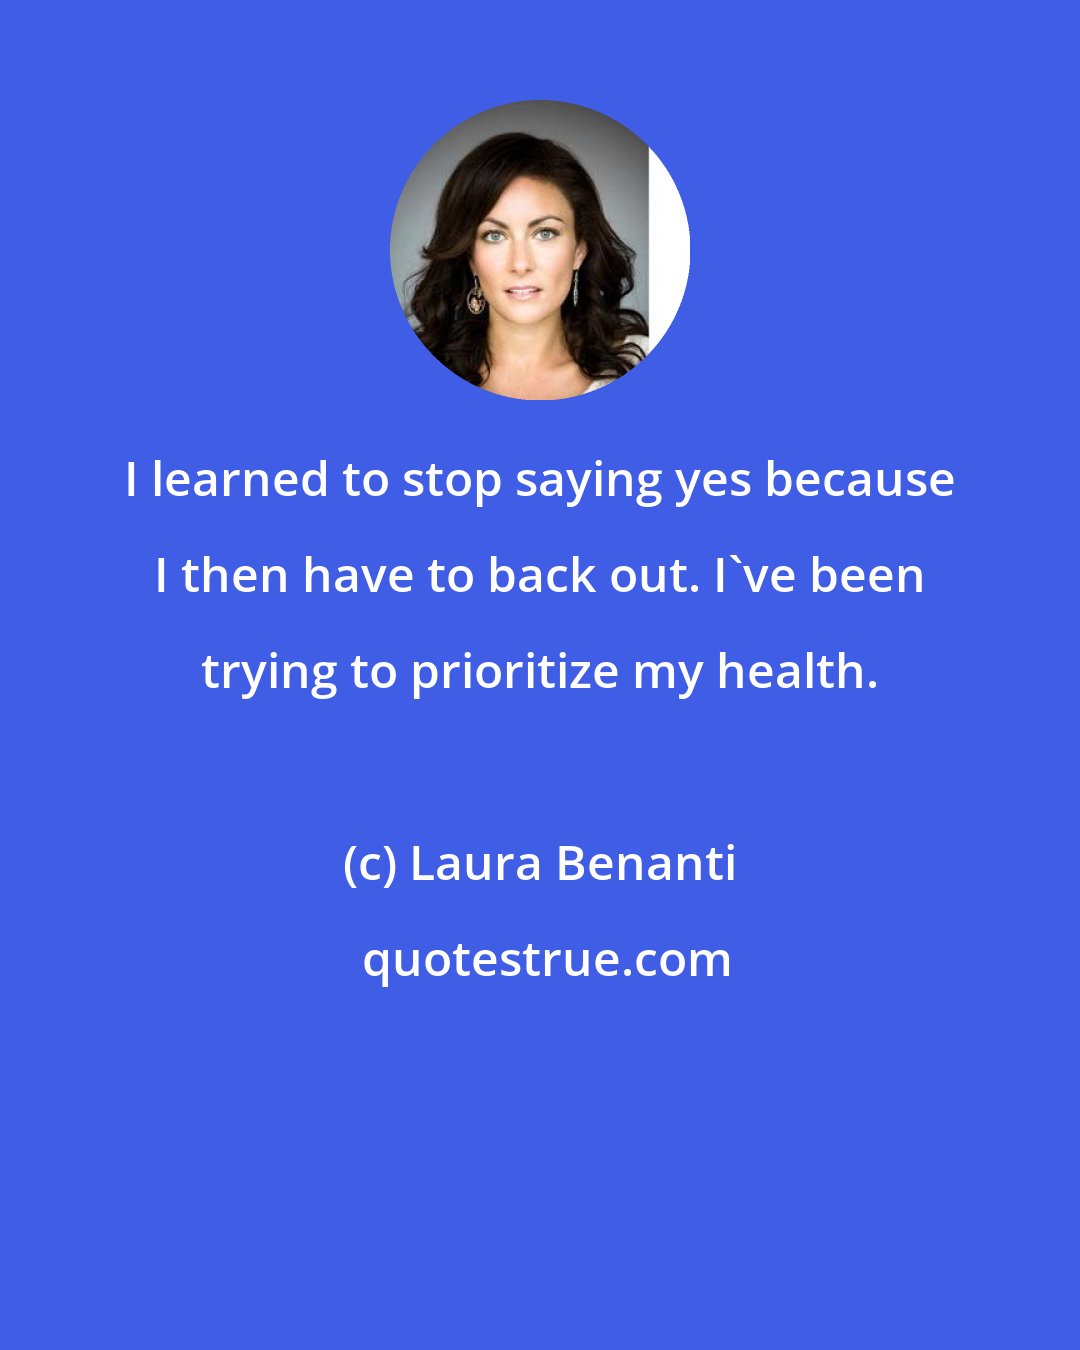 Laura Benanti: I learned to stop saying yes because I then have to back out. I've been trying to prioritize my health.